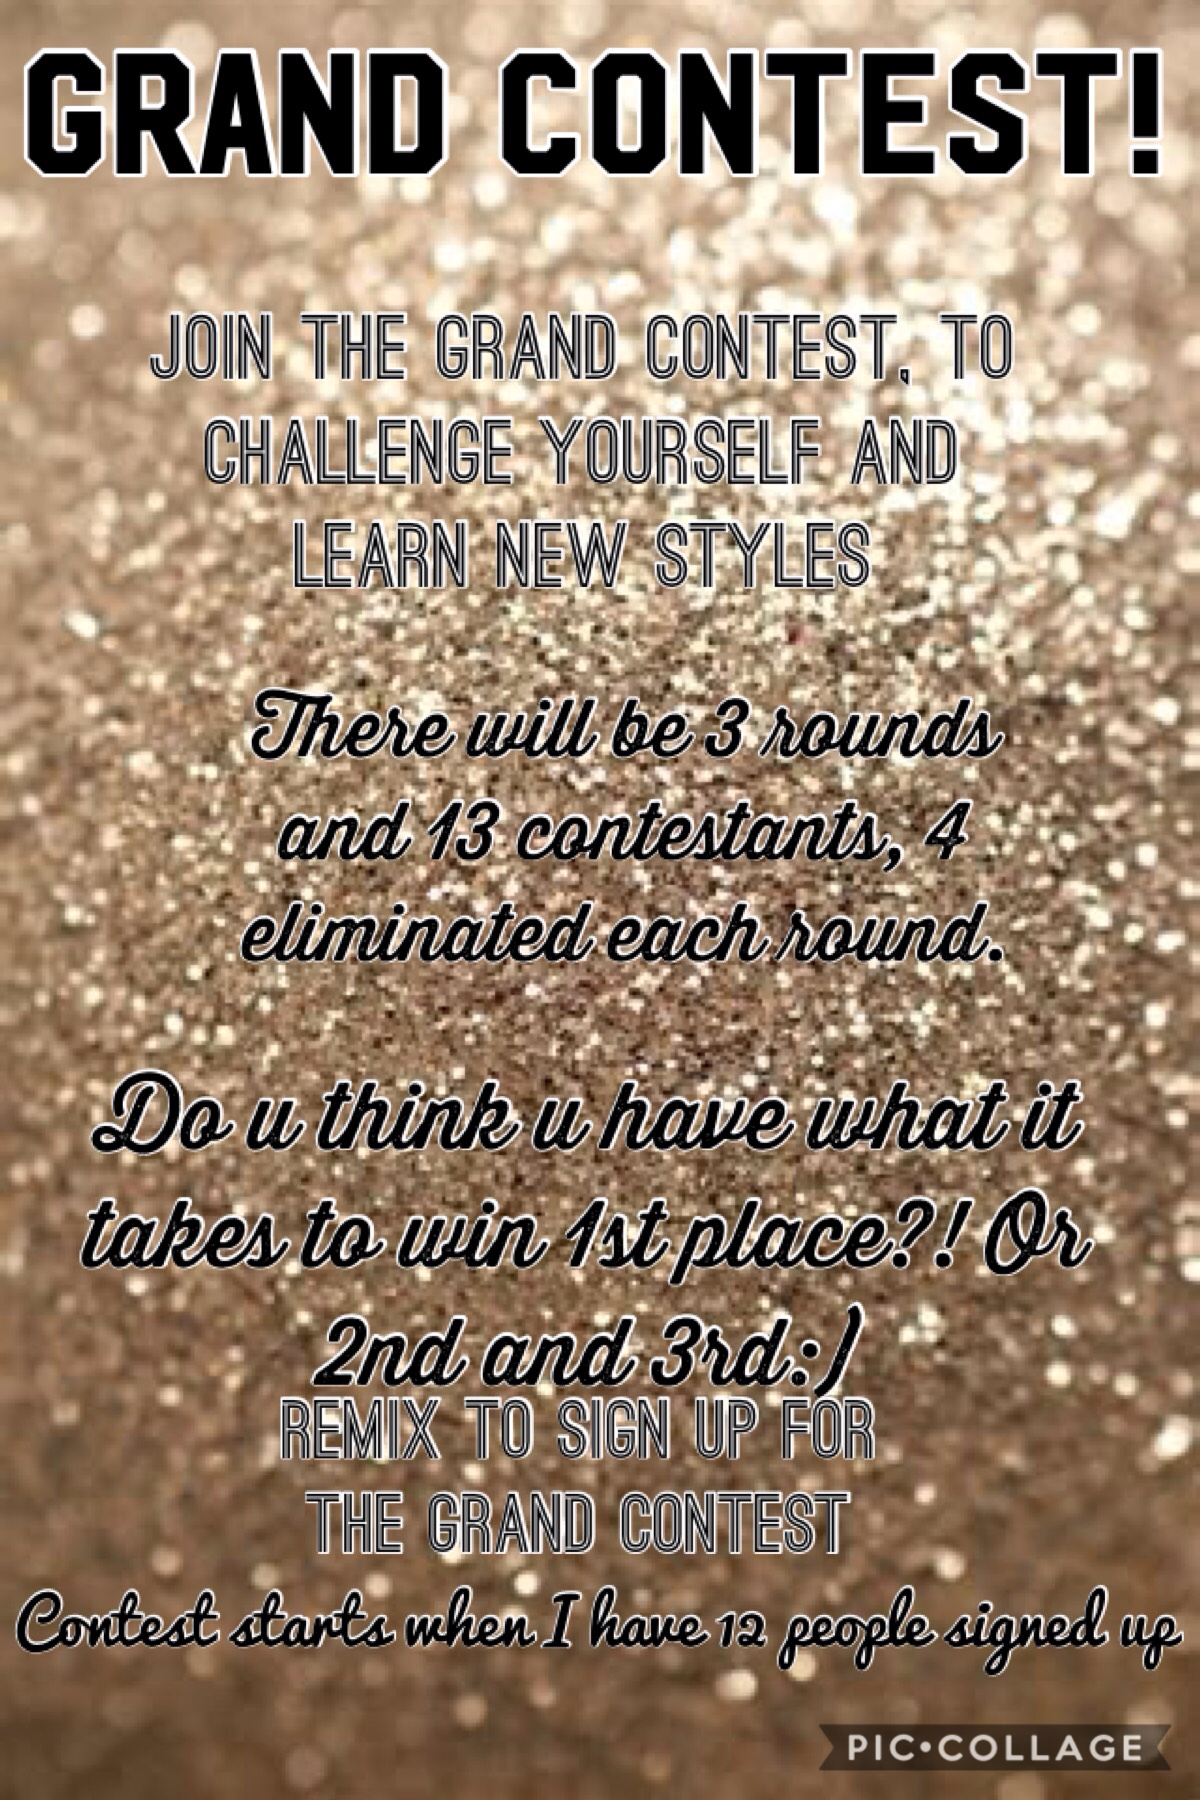 Join the Grand Contest to see if u can beat some amazing pic collagers!